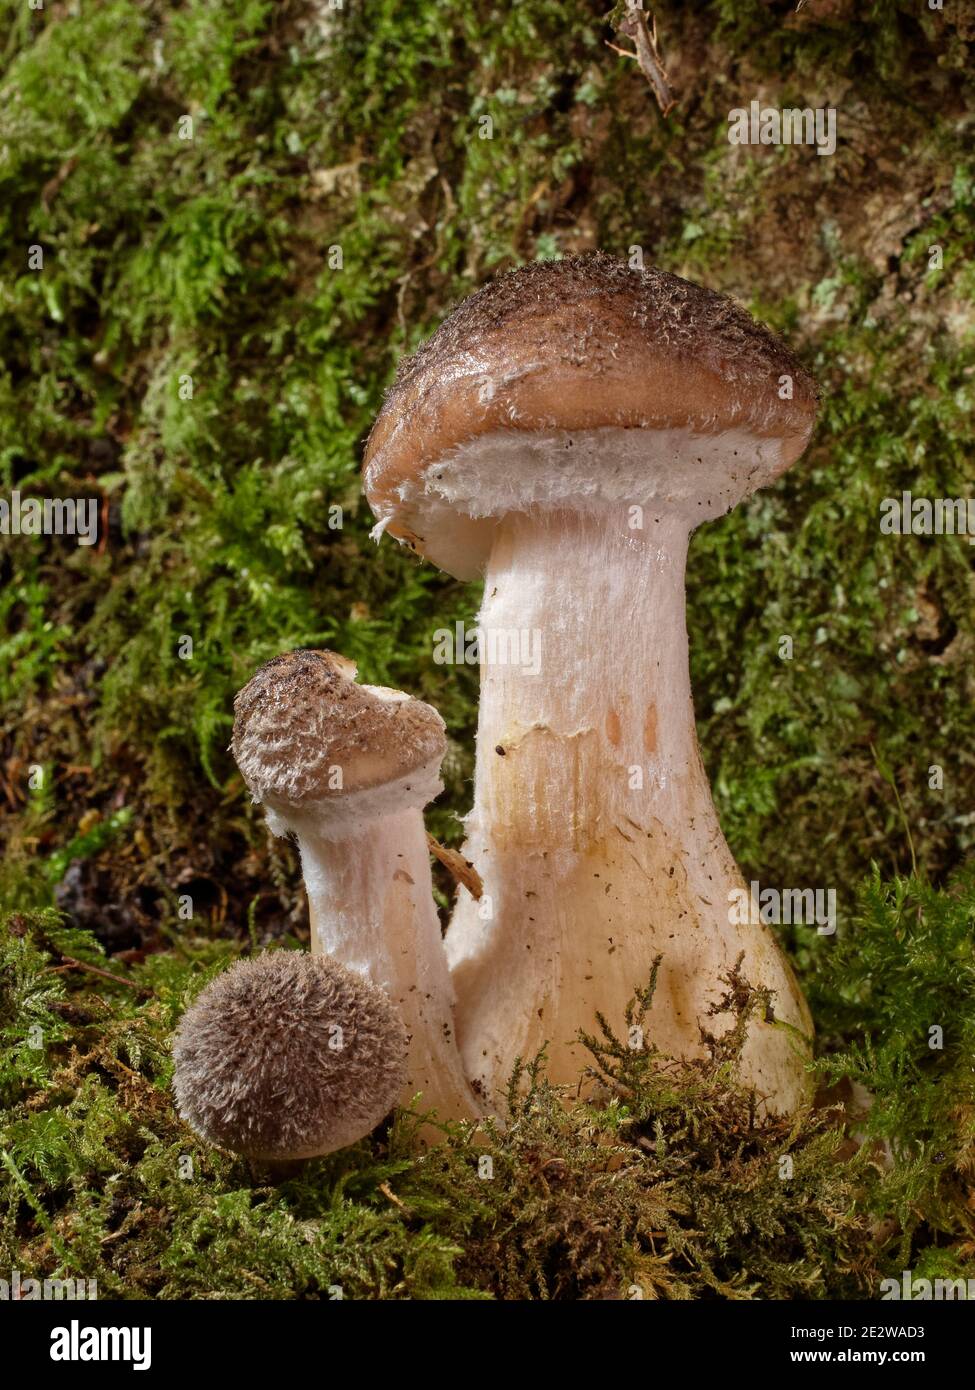 Bulbous honey fungus (Armillaria gallica) mushrooms growing on a rotting tree in damp deciduous woodland, Lower Woods reserve, Gloucestershire, UK. Stock Photo